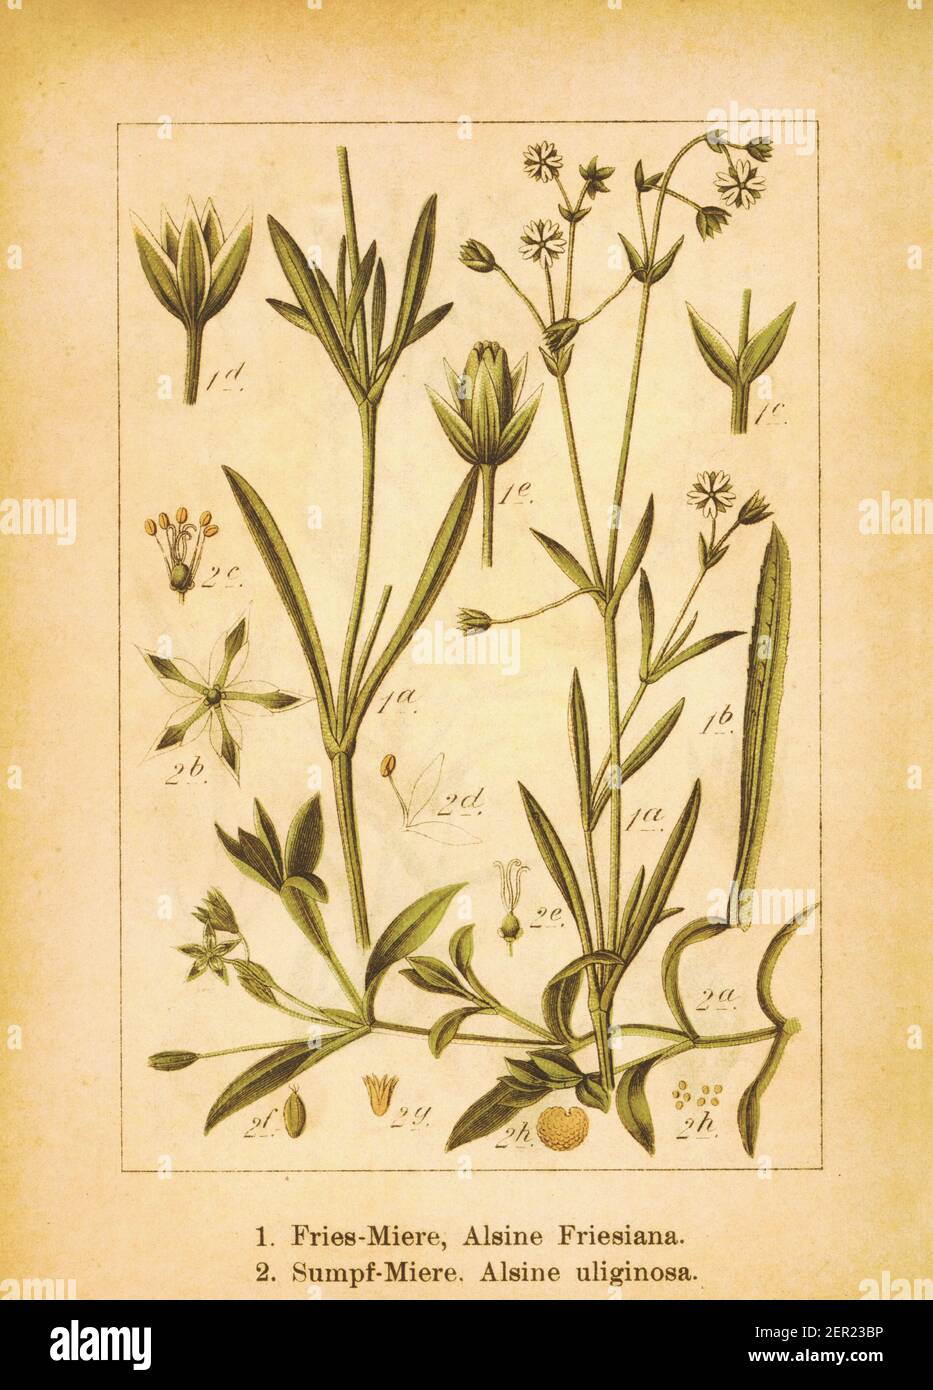 19th-century illustration of Alsine friesiana and bog chickweed. Engraving by Jacob Sturm (1771-1848) from the book Deutschlands Flora in Abbildungen Stock Photo